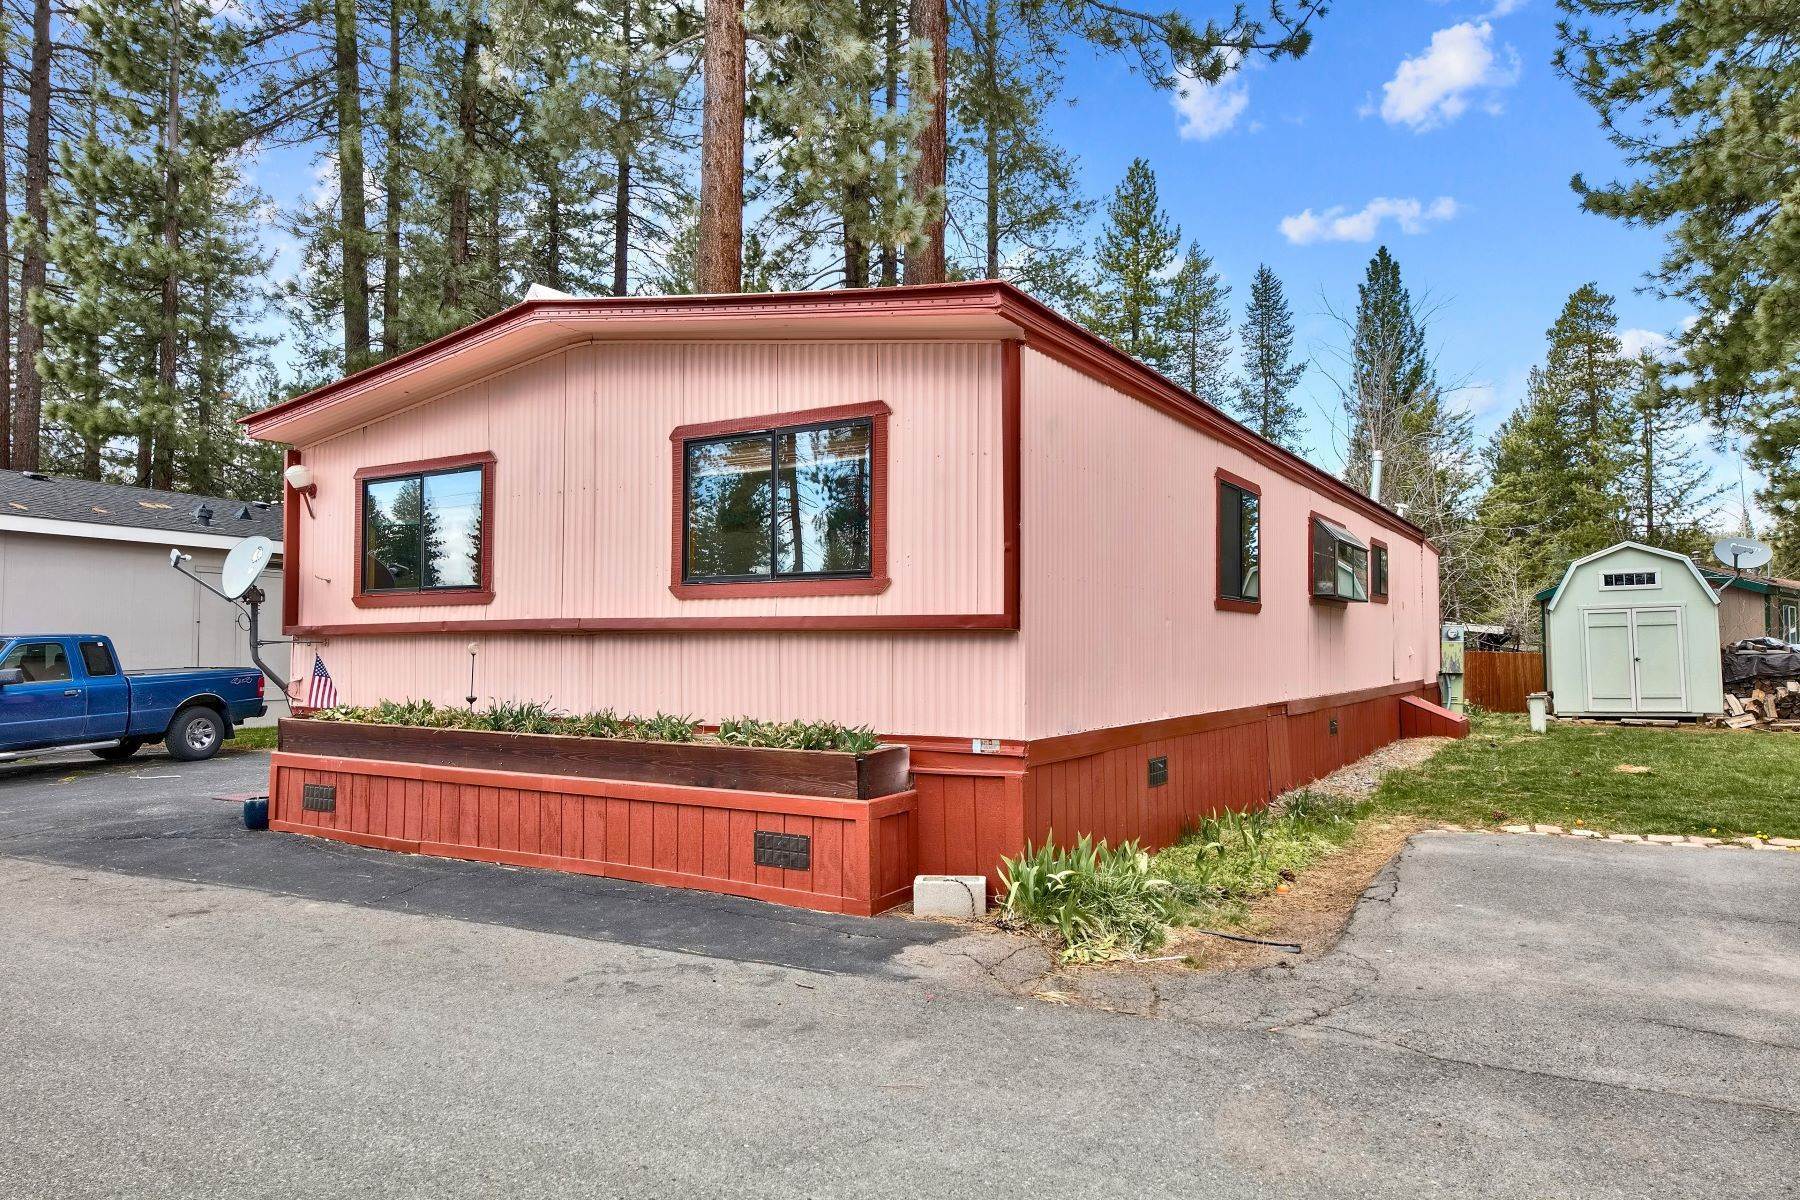 18. Property for Active at Coachland Mobile Home 10100 Pioneer Trail, #5 Truckee, California 96161 United States